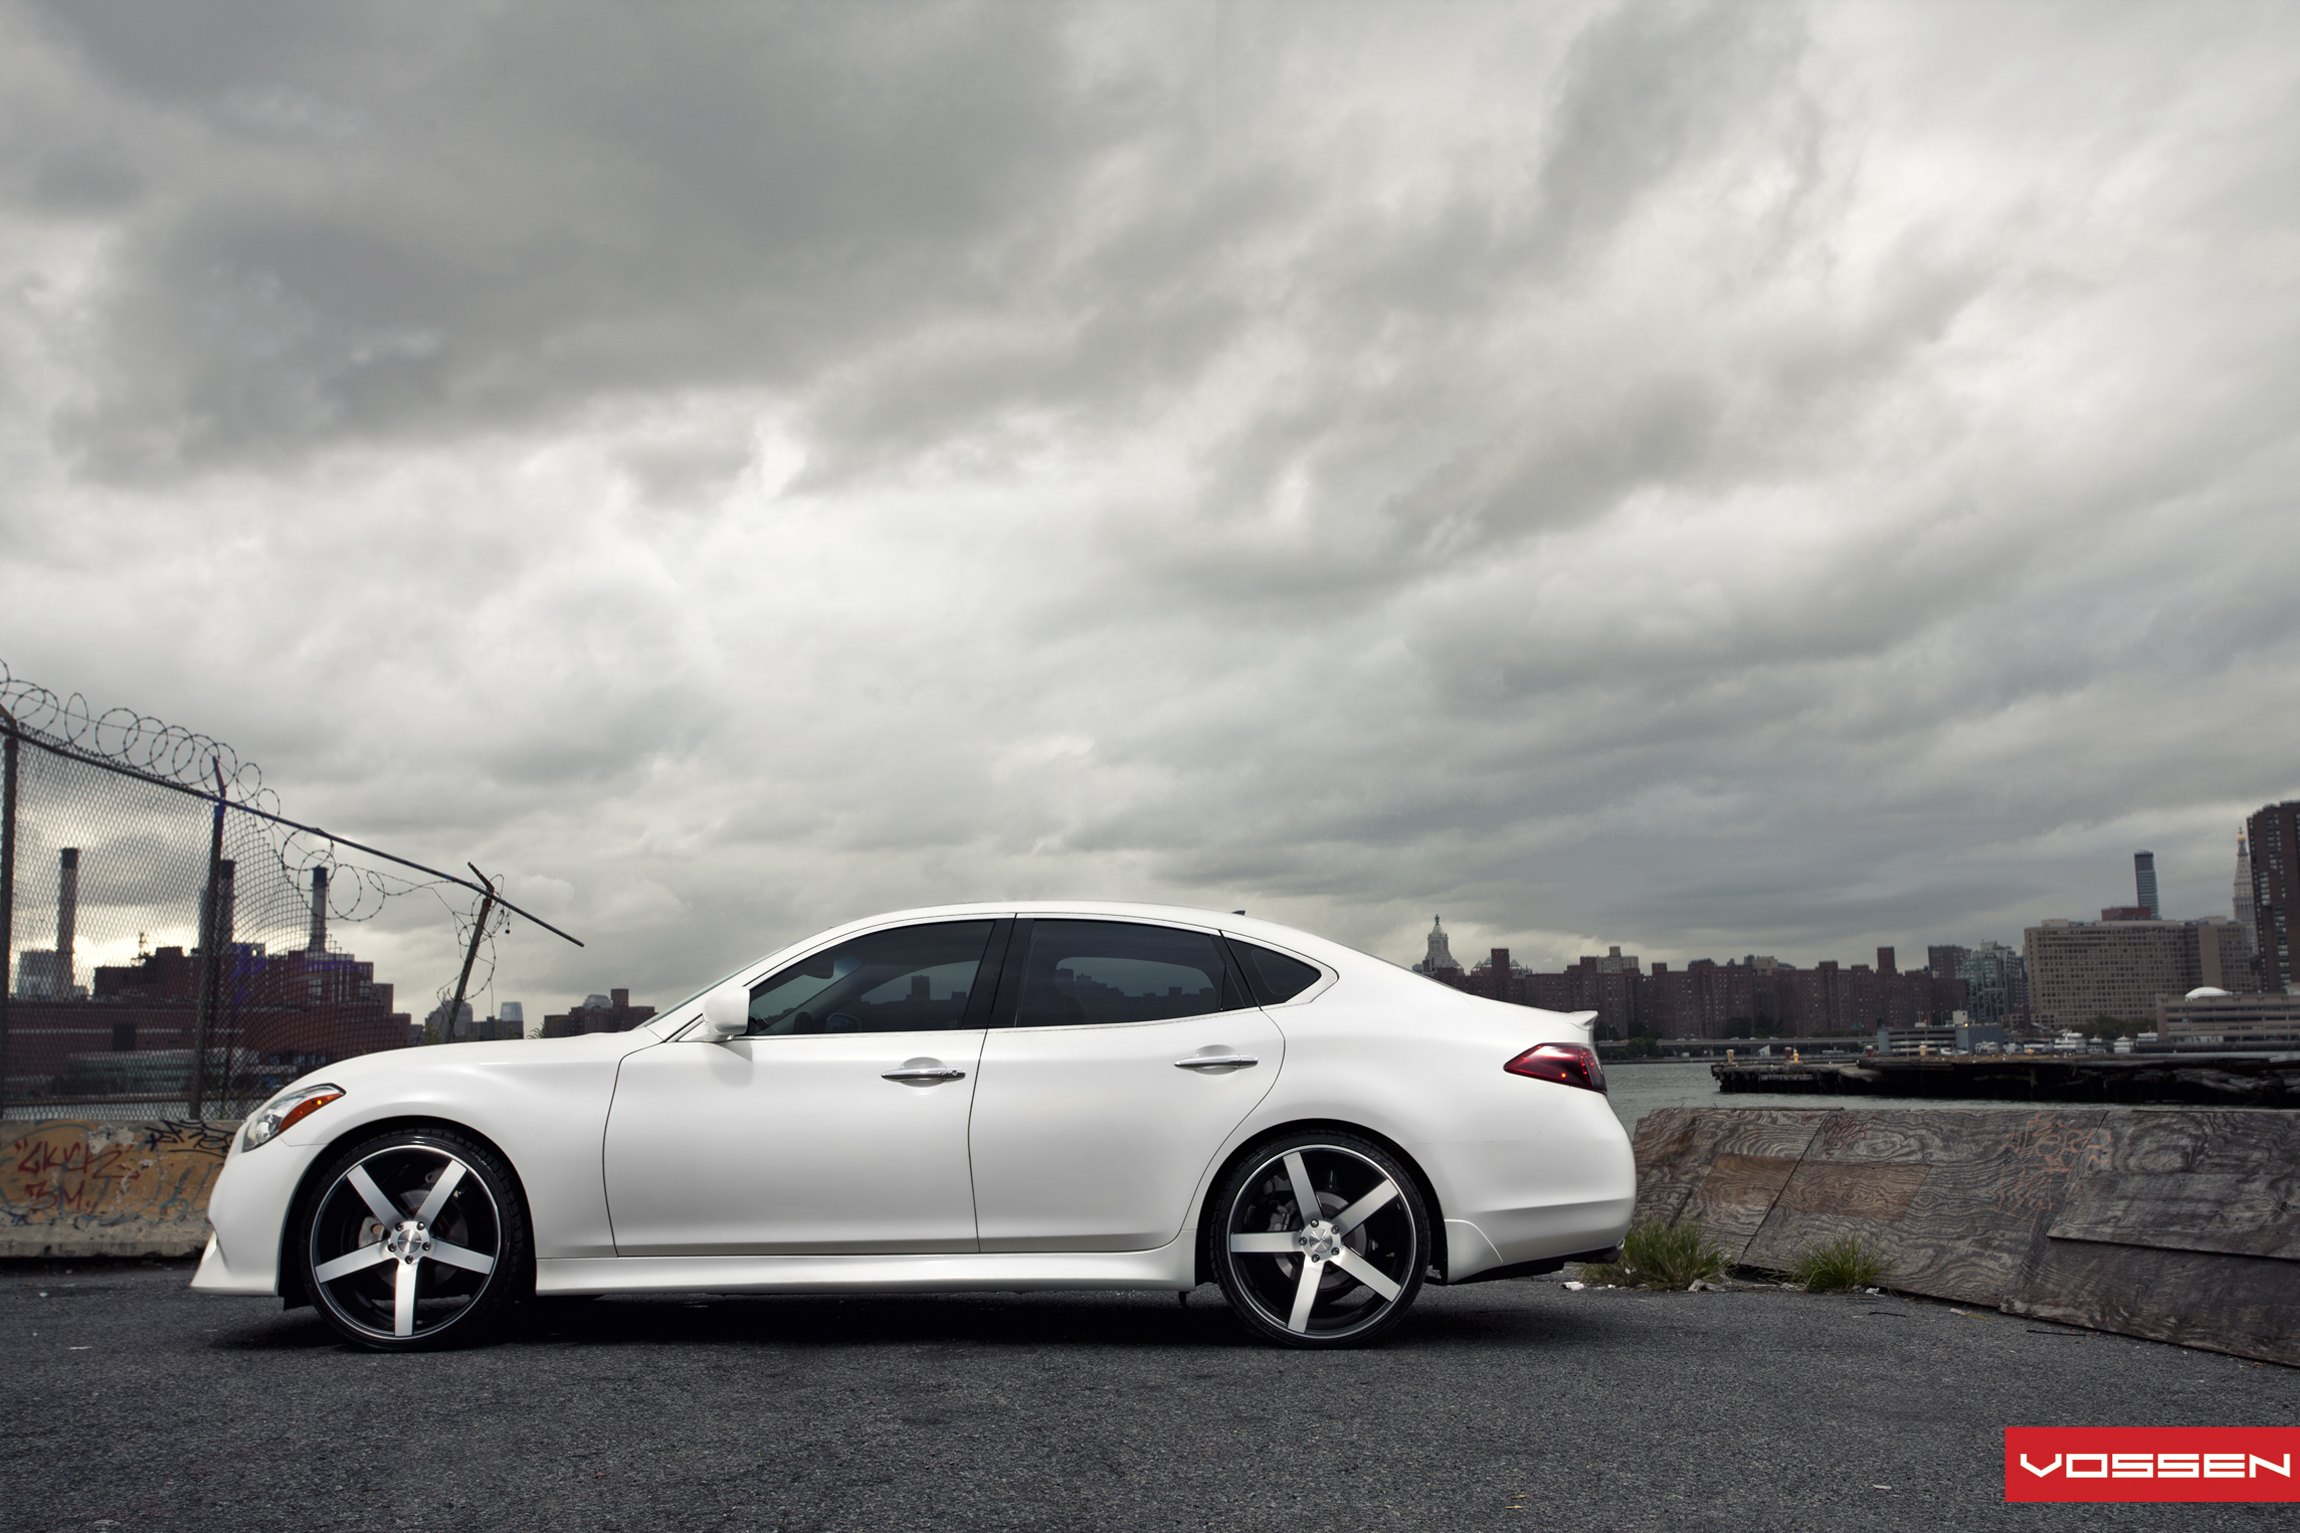 Aftermarket Side Skirts on White Infiniti M37 - Photo by Vossen